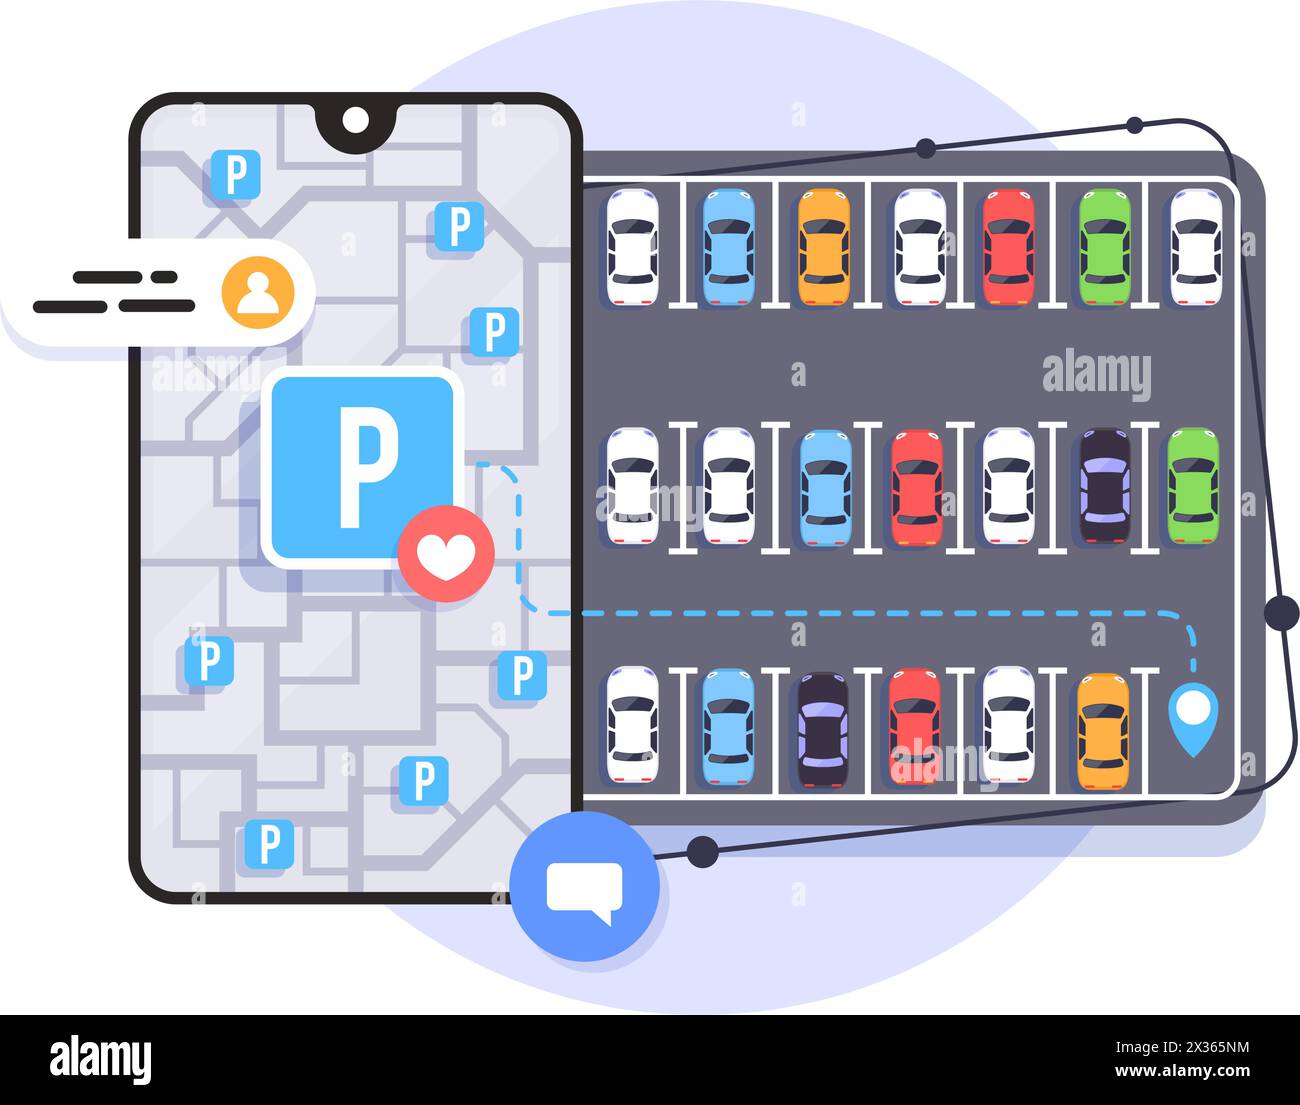 Online application for finding parking spaces, city parking, vector illustration. Stock Vector